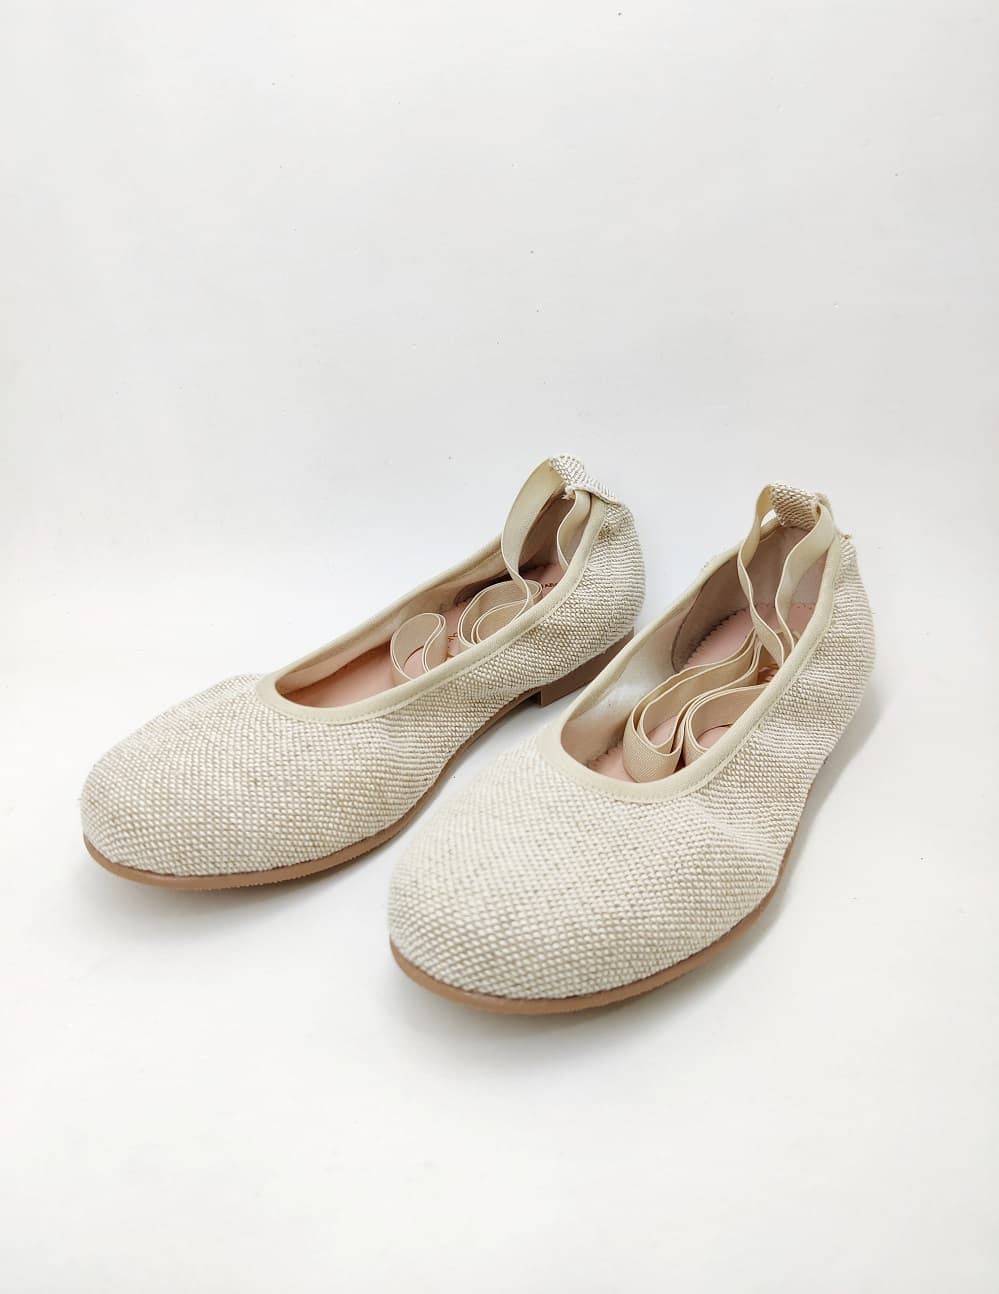 Ruth Secret Ballerinas in Rustic Linen with ribbons - Image 3